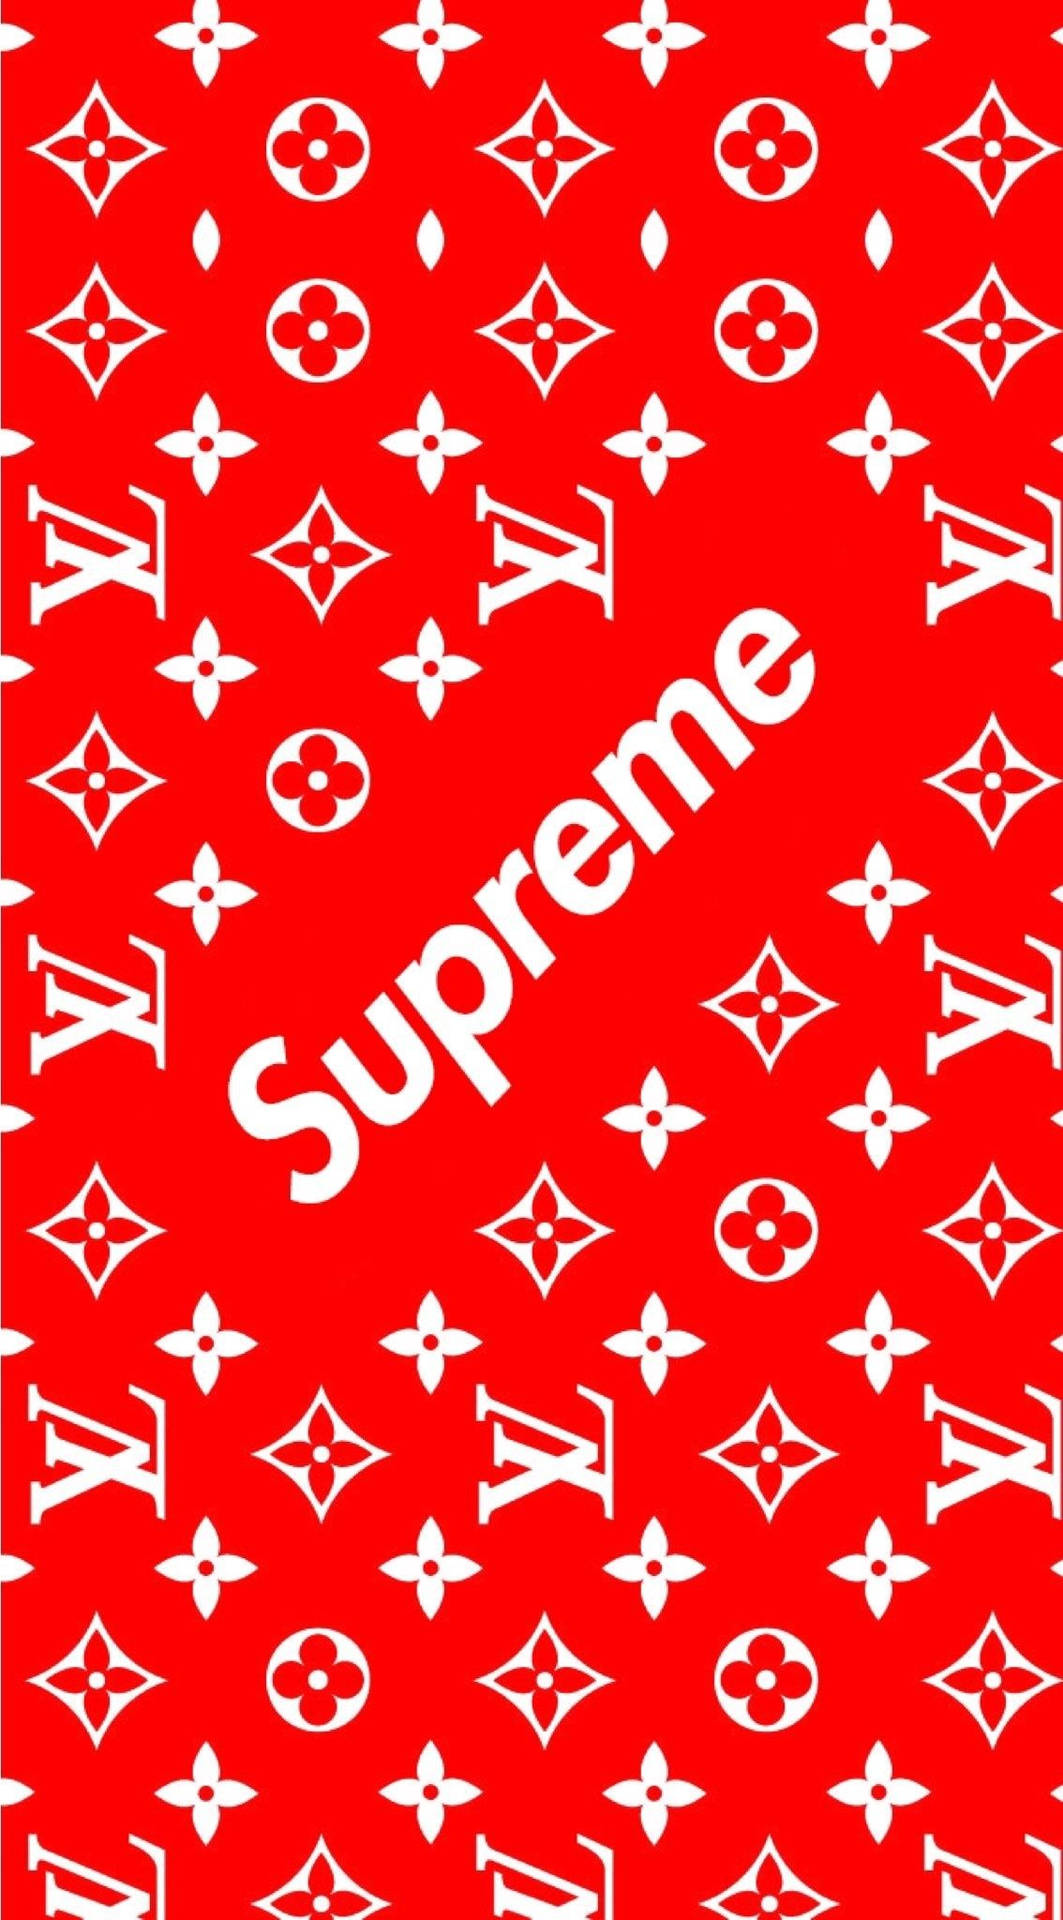 Cool Hypebeast Supreme Background